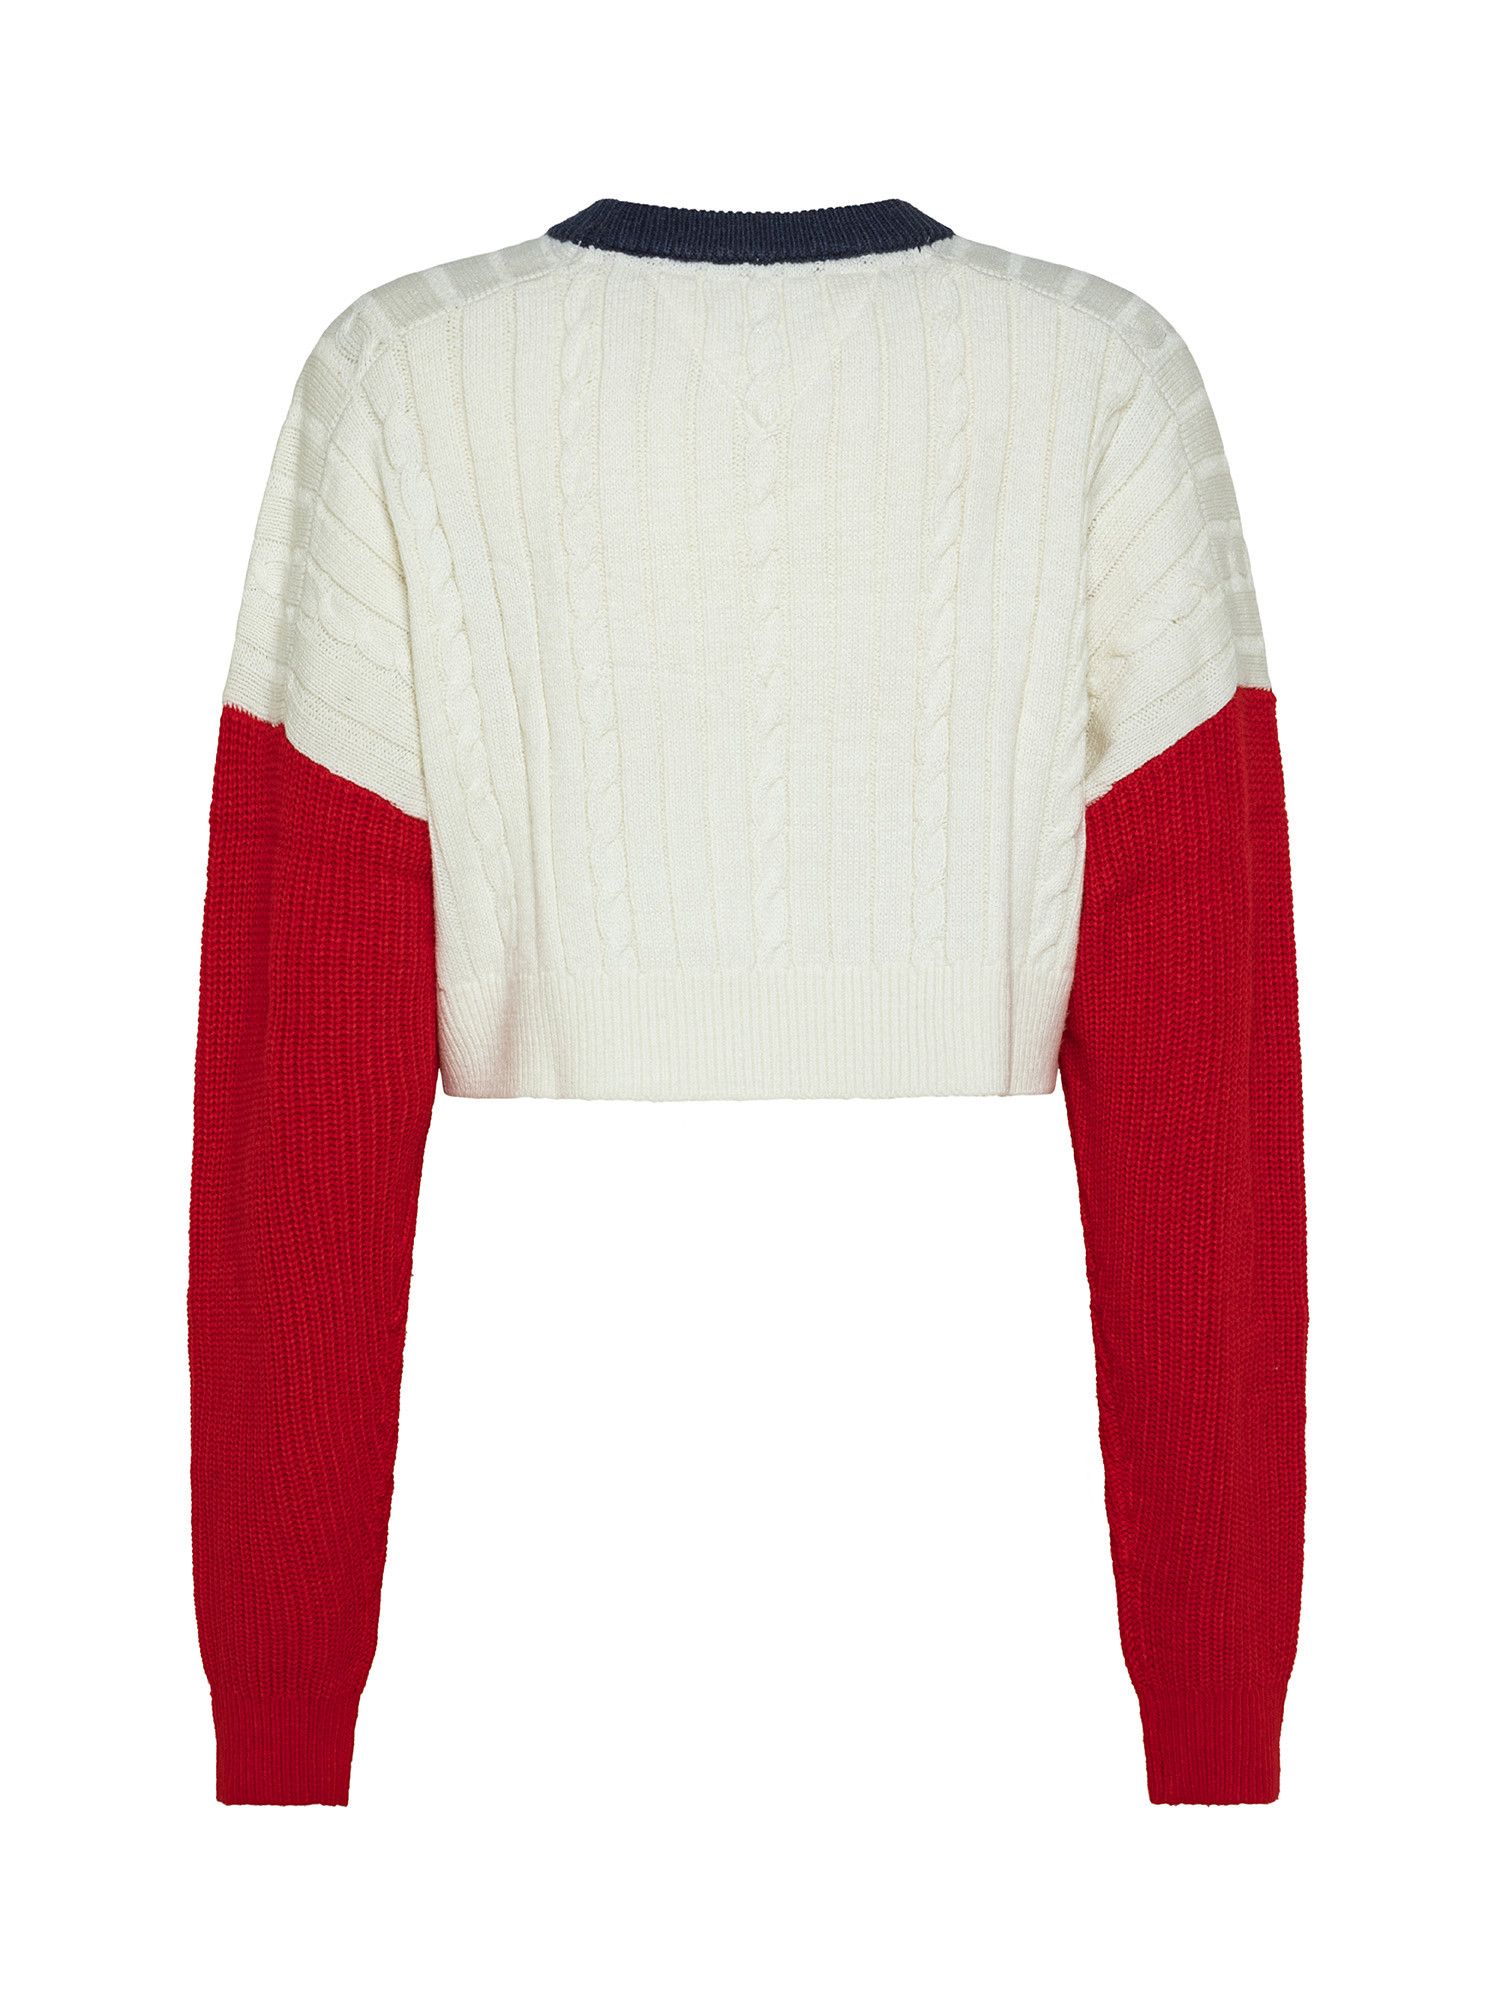 Crop pullover with embroidered logo, Red, large image number 1